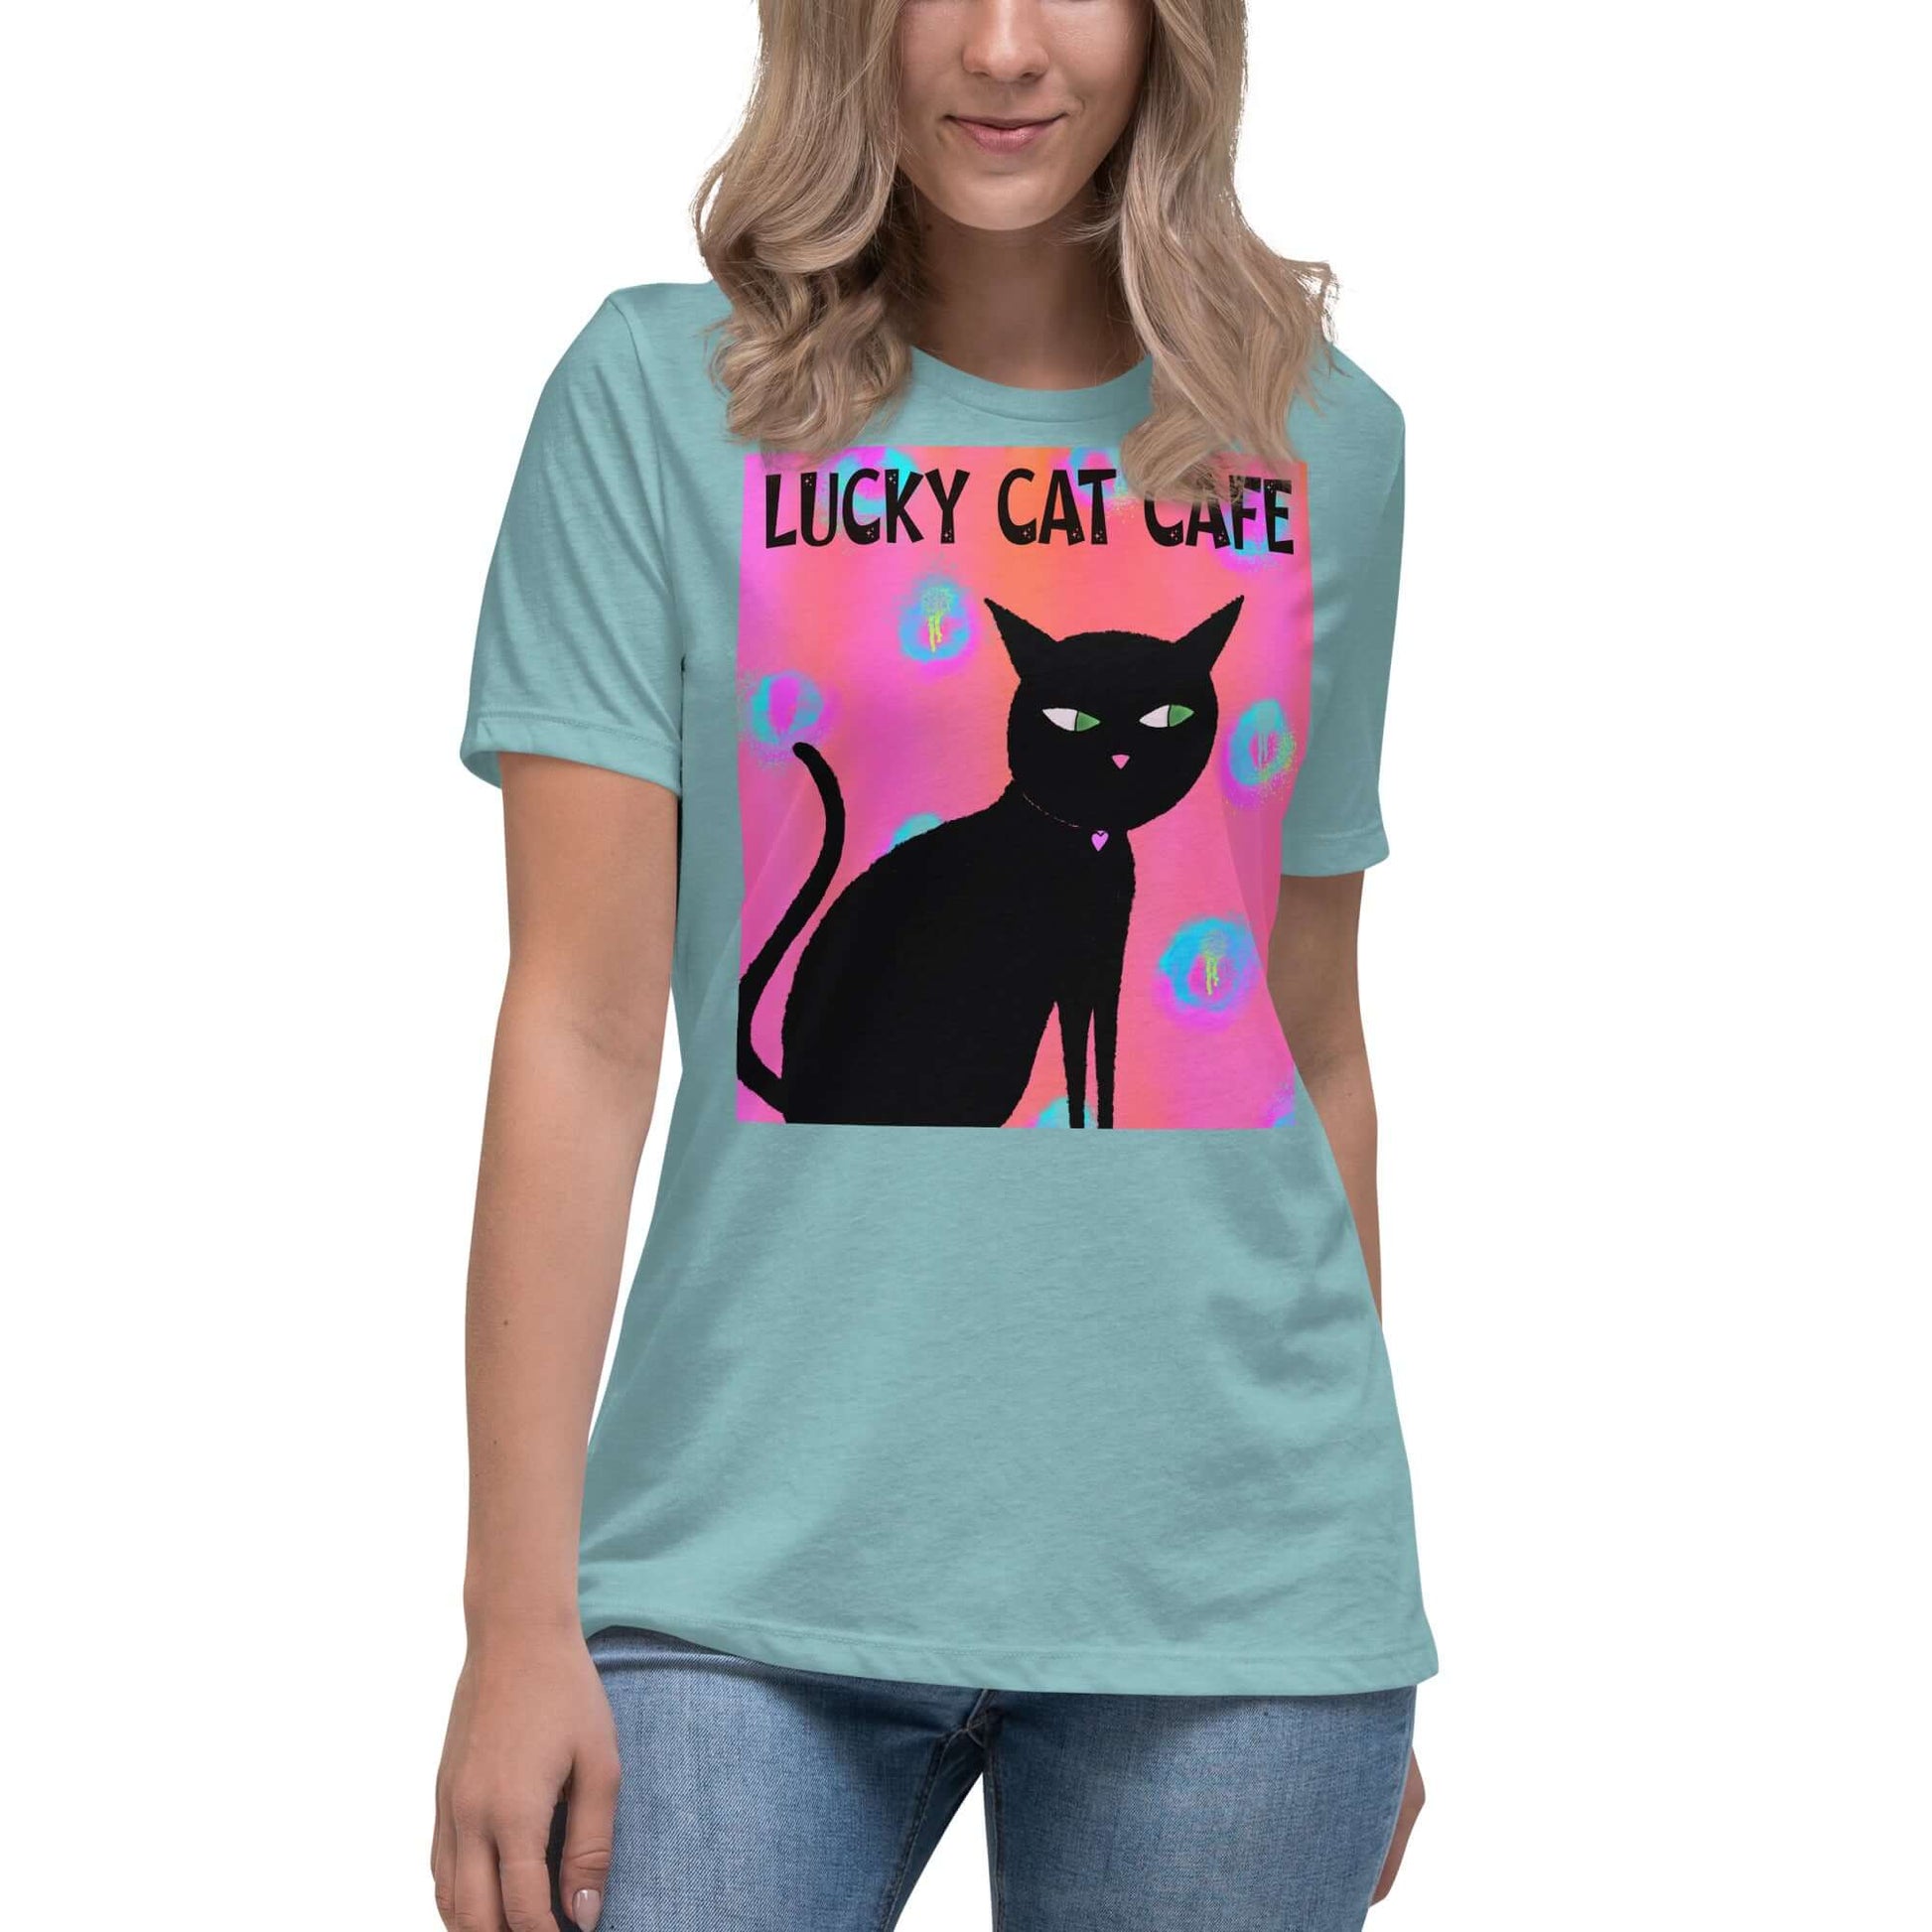 Black Cat on Hot Pink Tie Dye Background with Text “Lucky Cat Cafe” Women’s Short Sleeve Tee in Heather Blue Lagoon